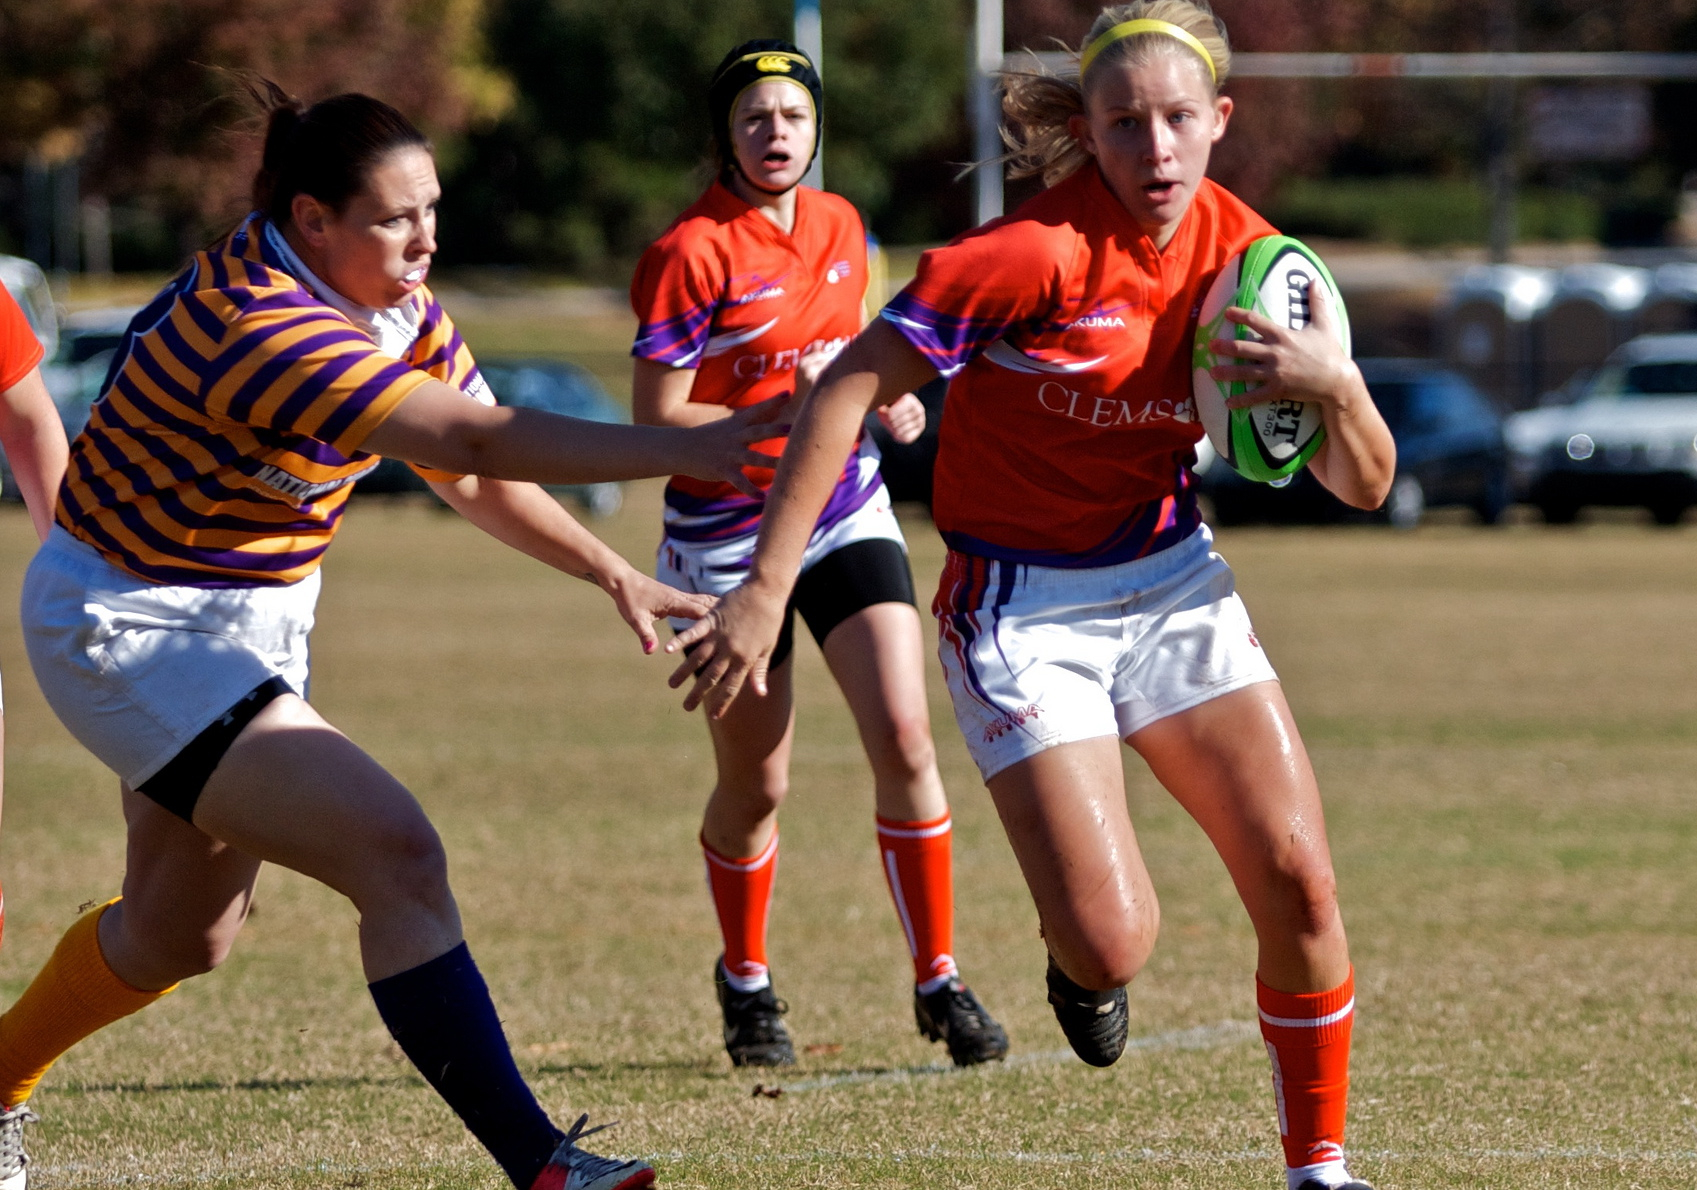 USA College 7s: Pools announced for College 7s National Championship